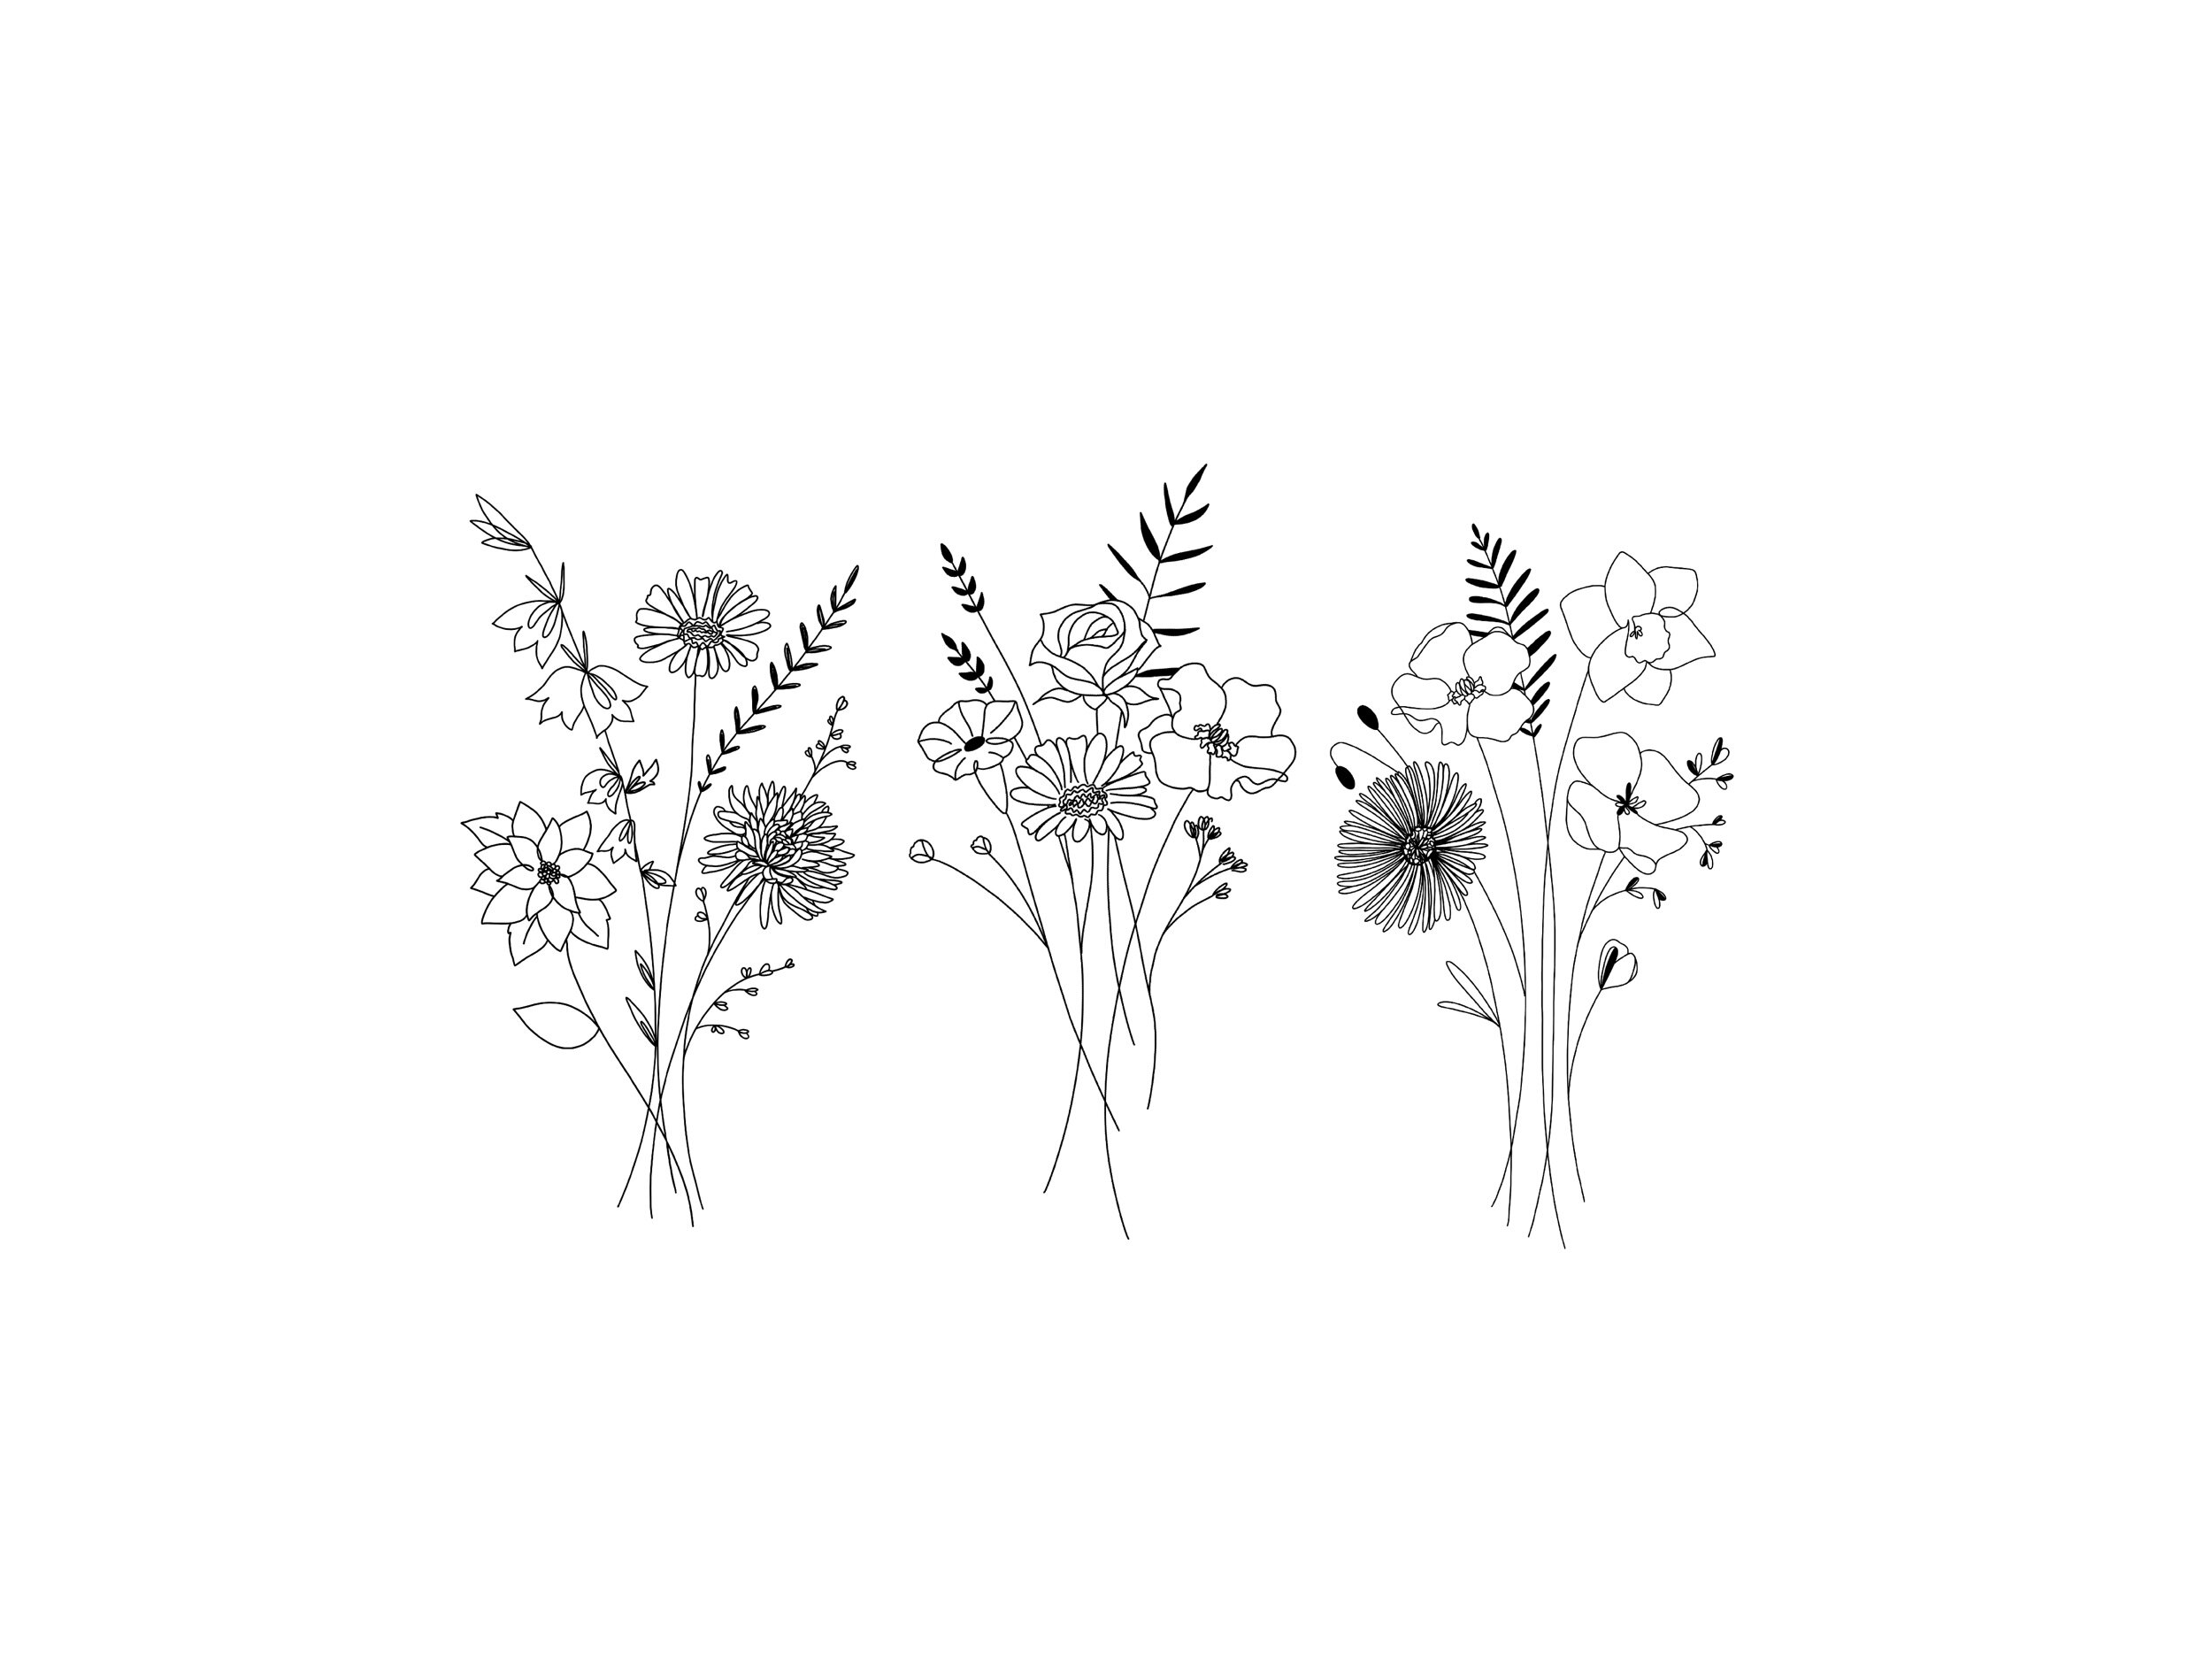 12 Birth Flower Tattoo Designs For Your Next Dainty Ink